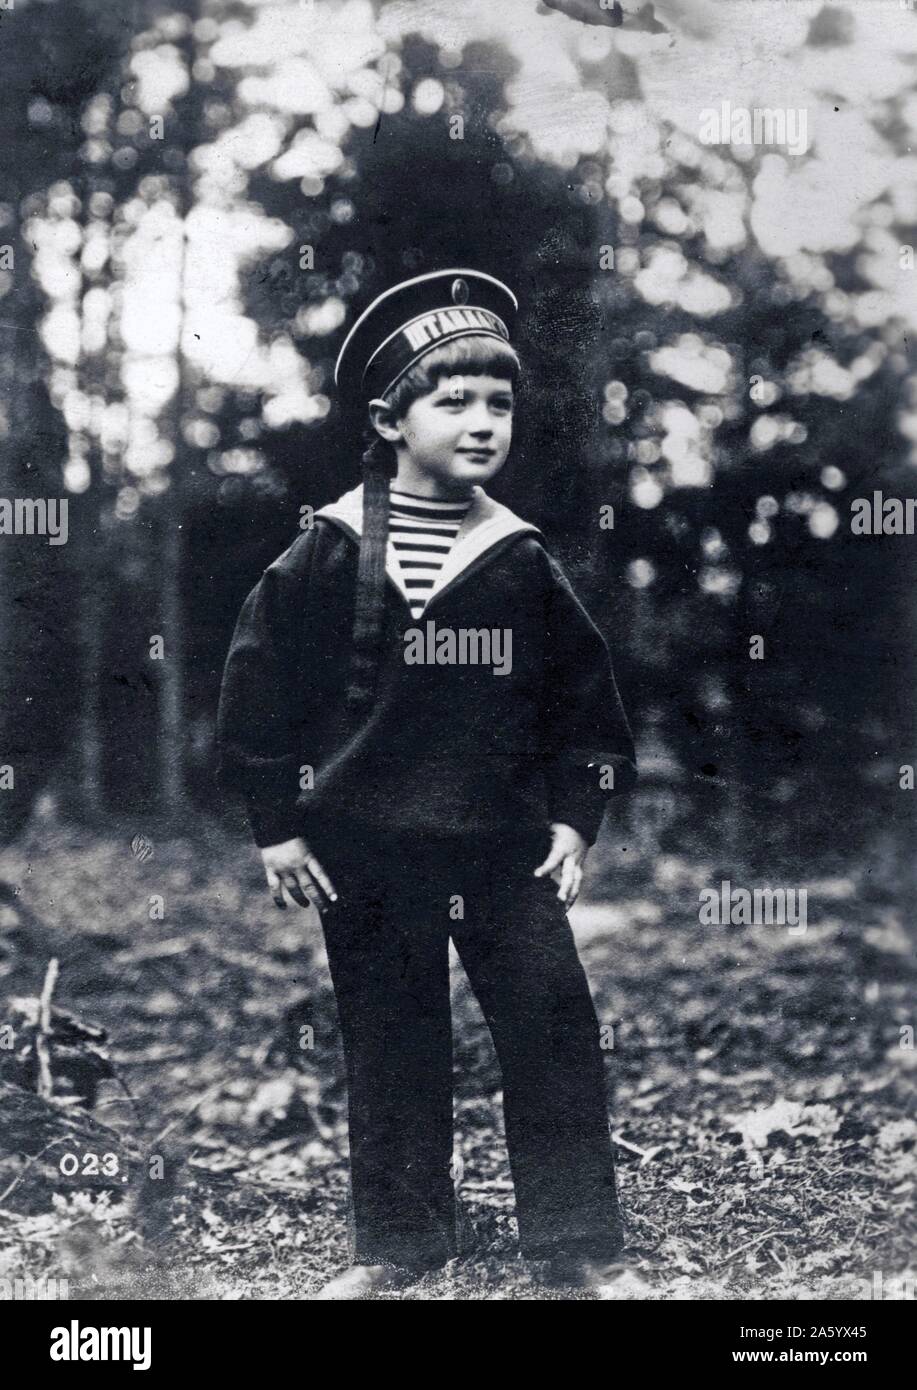 Alexei Nikolaevich (1904 - 17 July 1918) of the House of Romanov, was the Tsesarevich; heir apparent; to the throne of the Russian Empire. He was the youngest child and only son of Emperor Nicholas II and Empress Alexandra Feodorovna. He was born with hemophilia Stock Photo